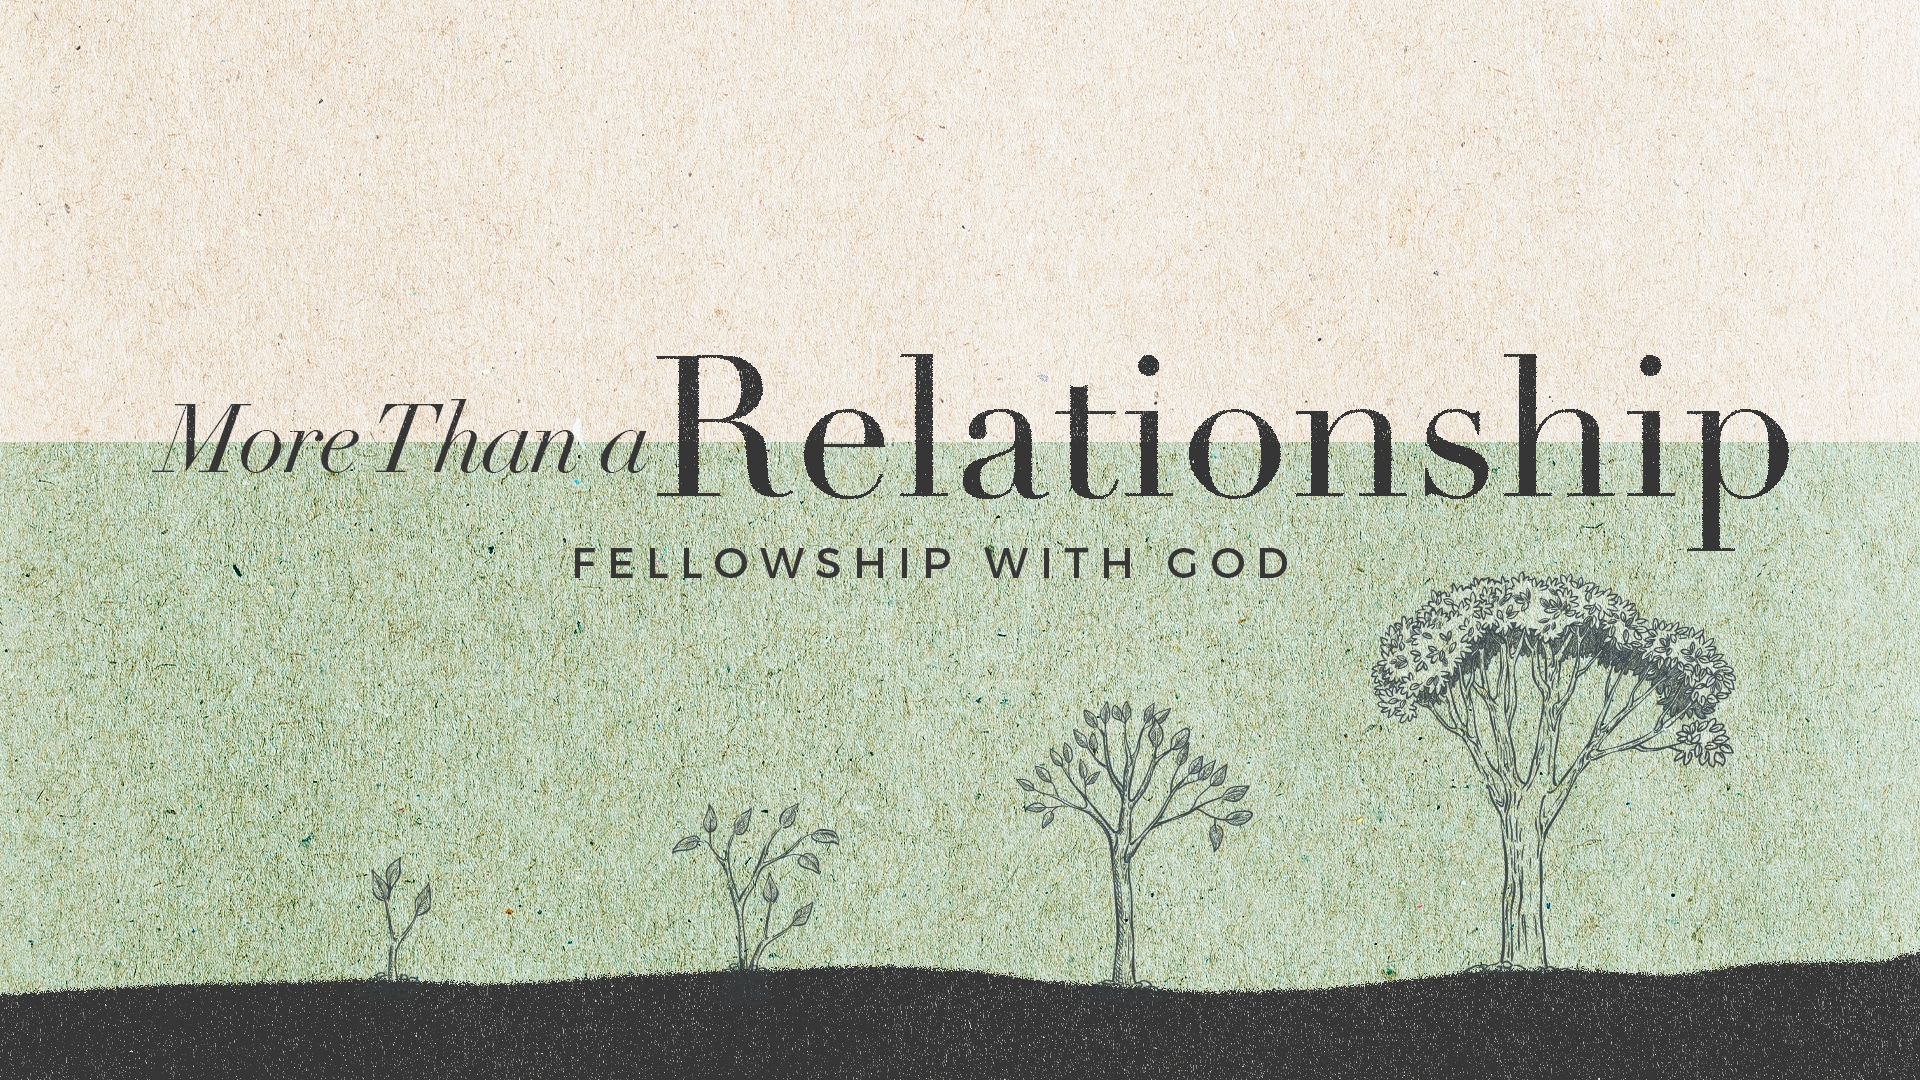 More than a Relationship Fellowship with God thumbnail